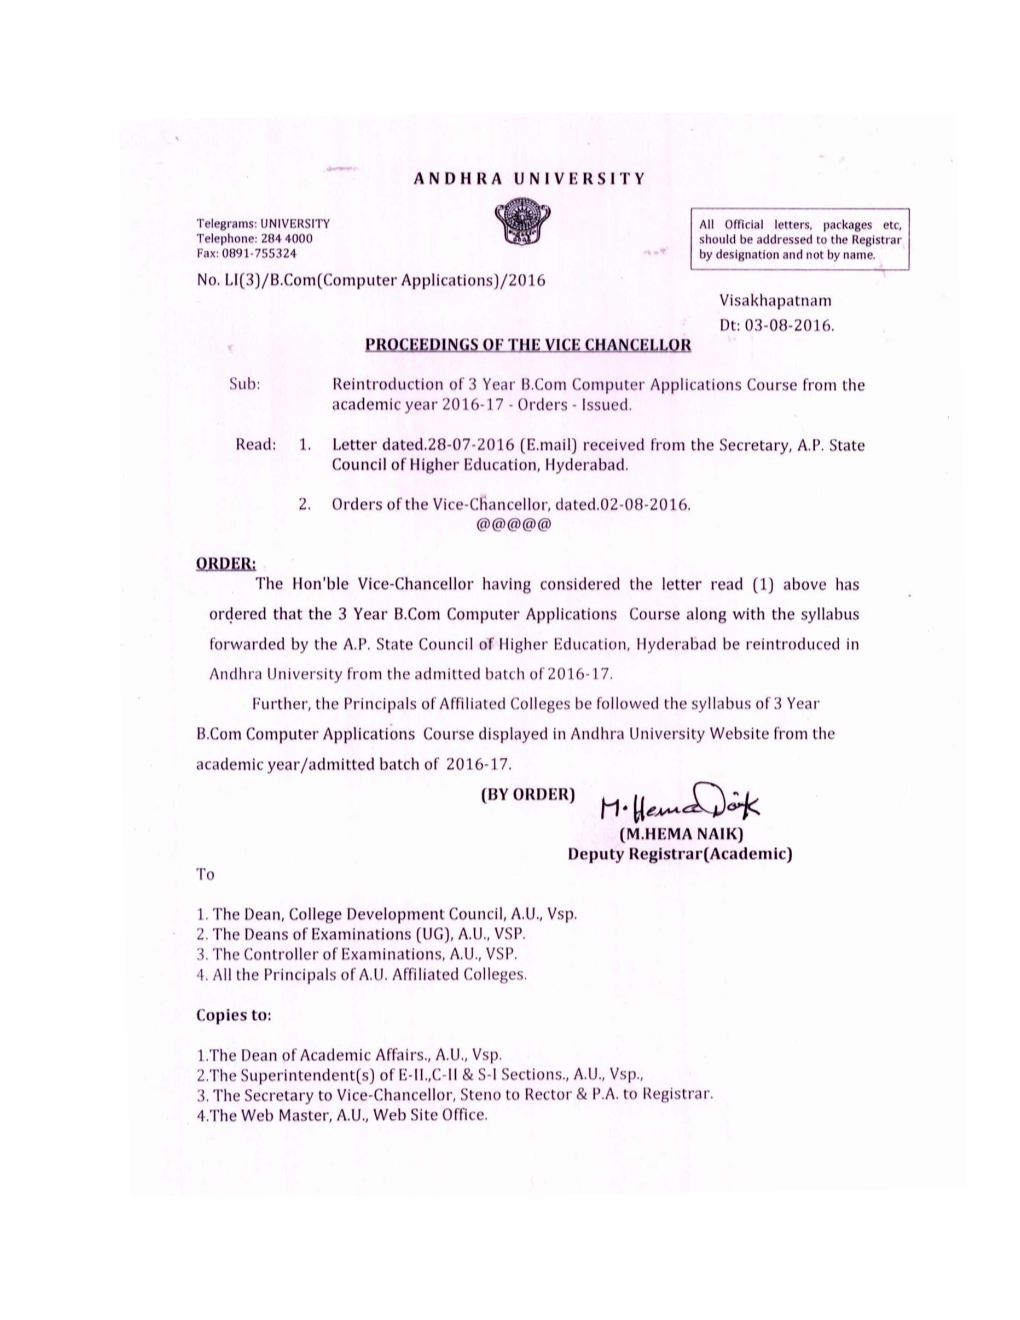 Revised Common Framework of CBCS for Colleges in Andhra Pradesh